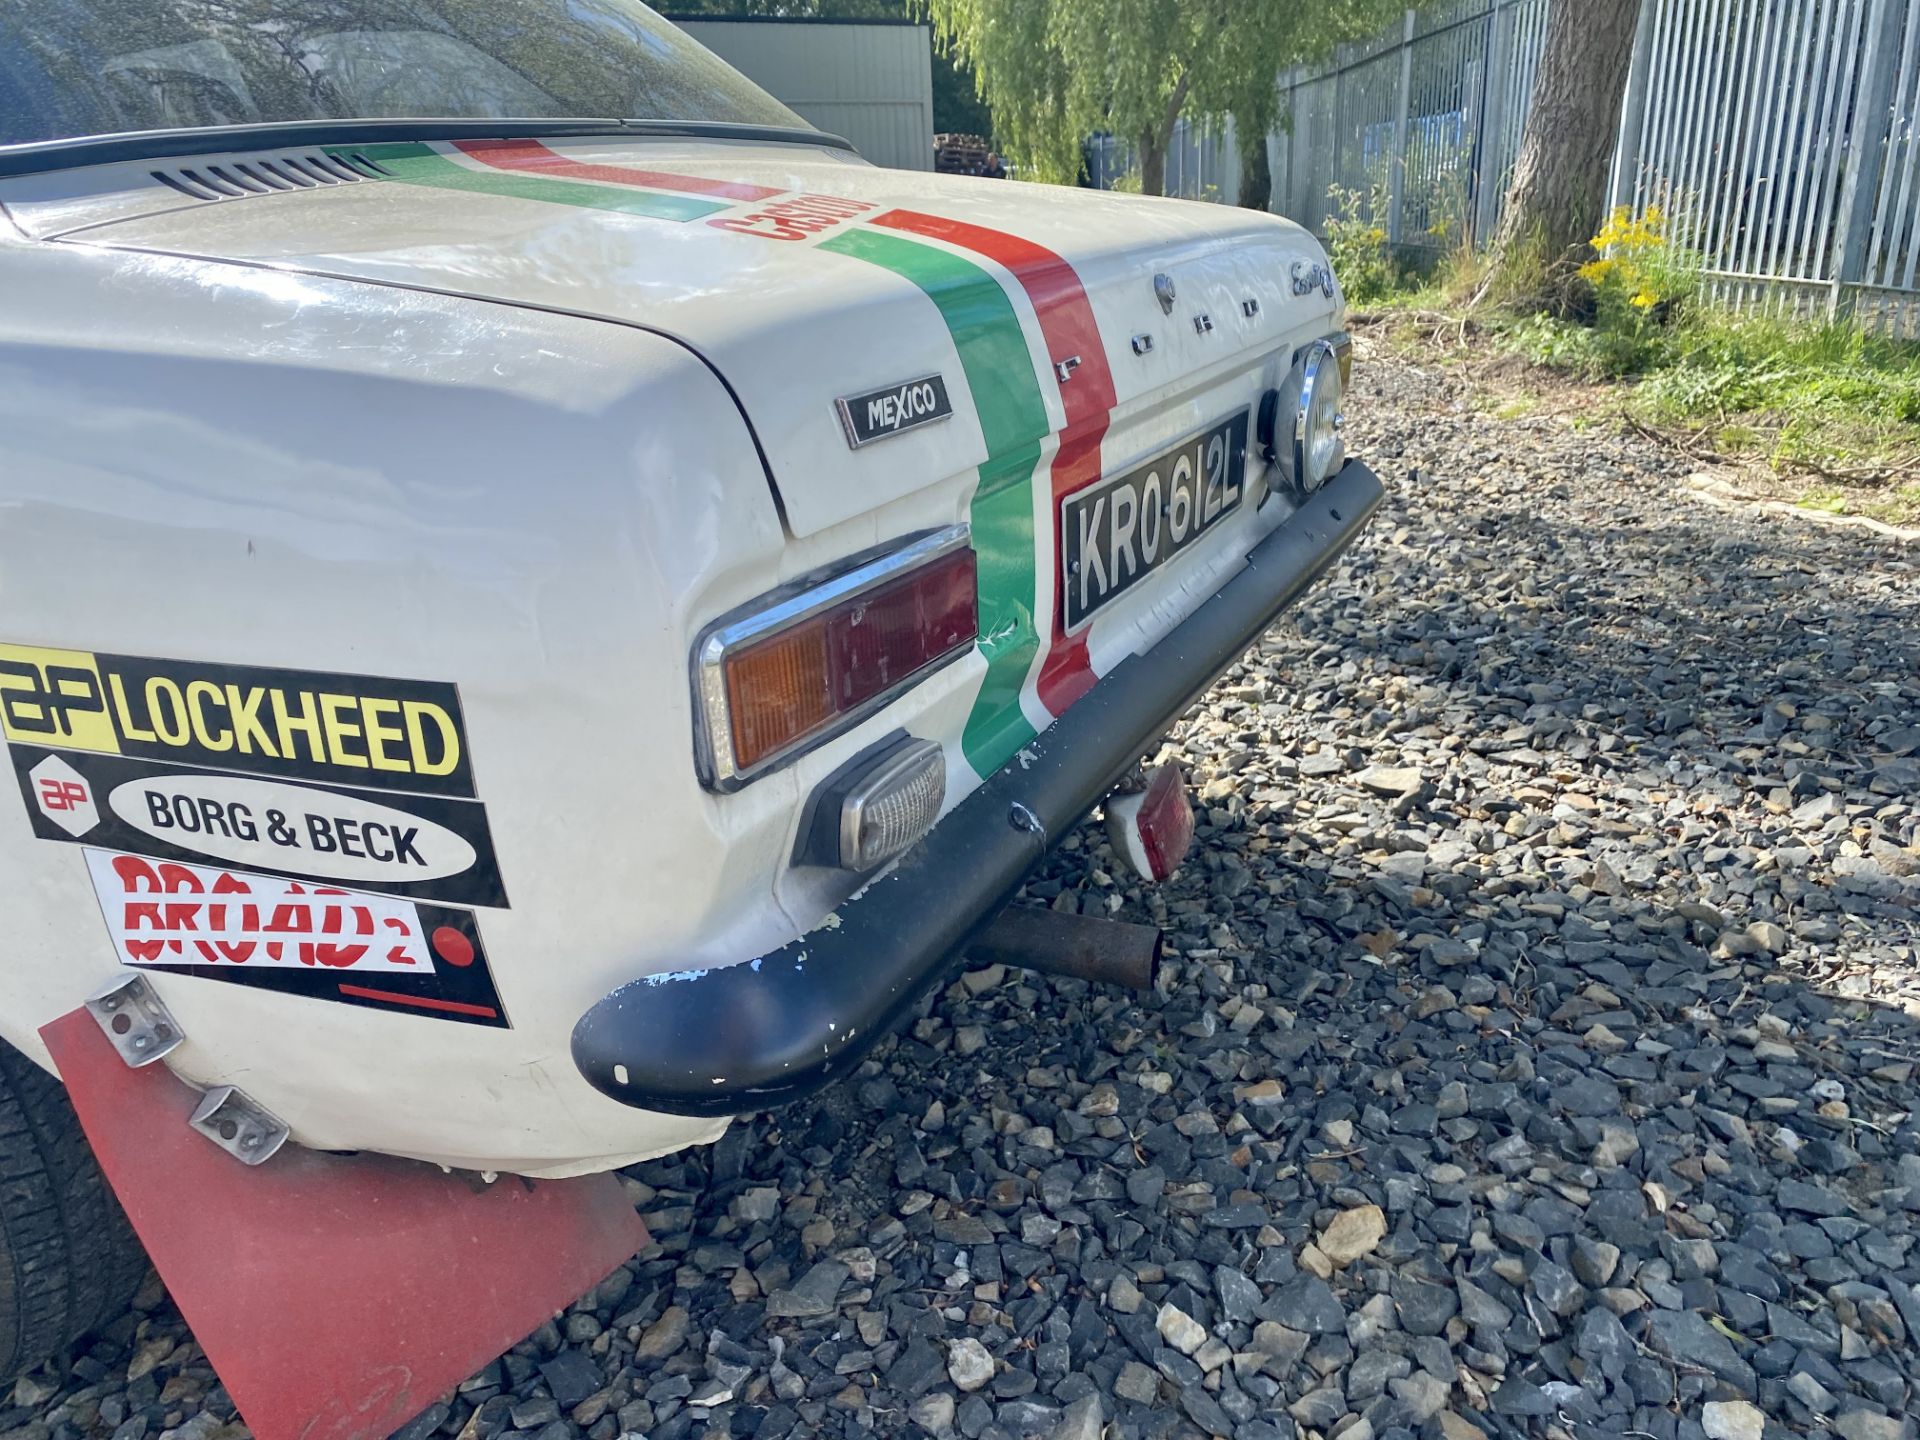 Ford Escort Mexico - Image 30 of 51